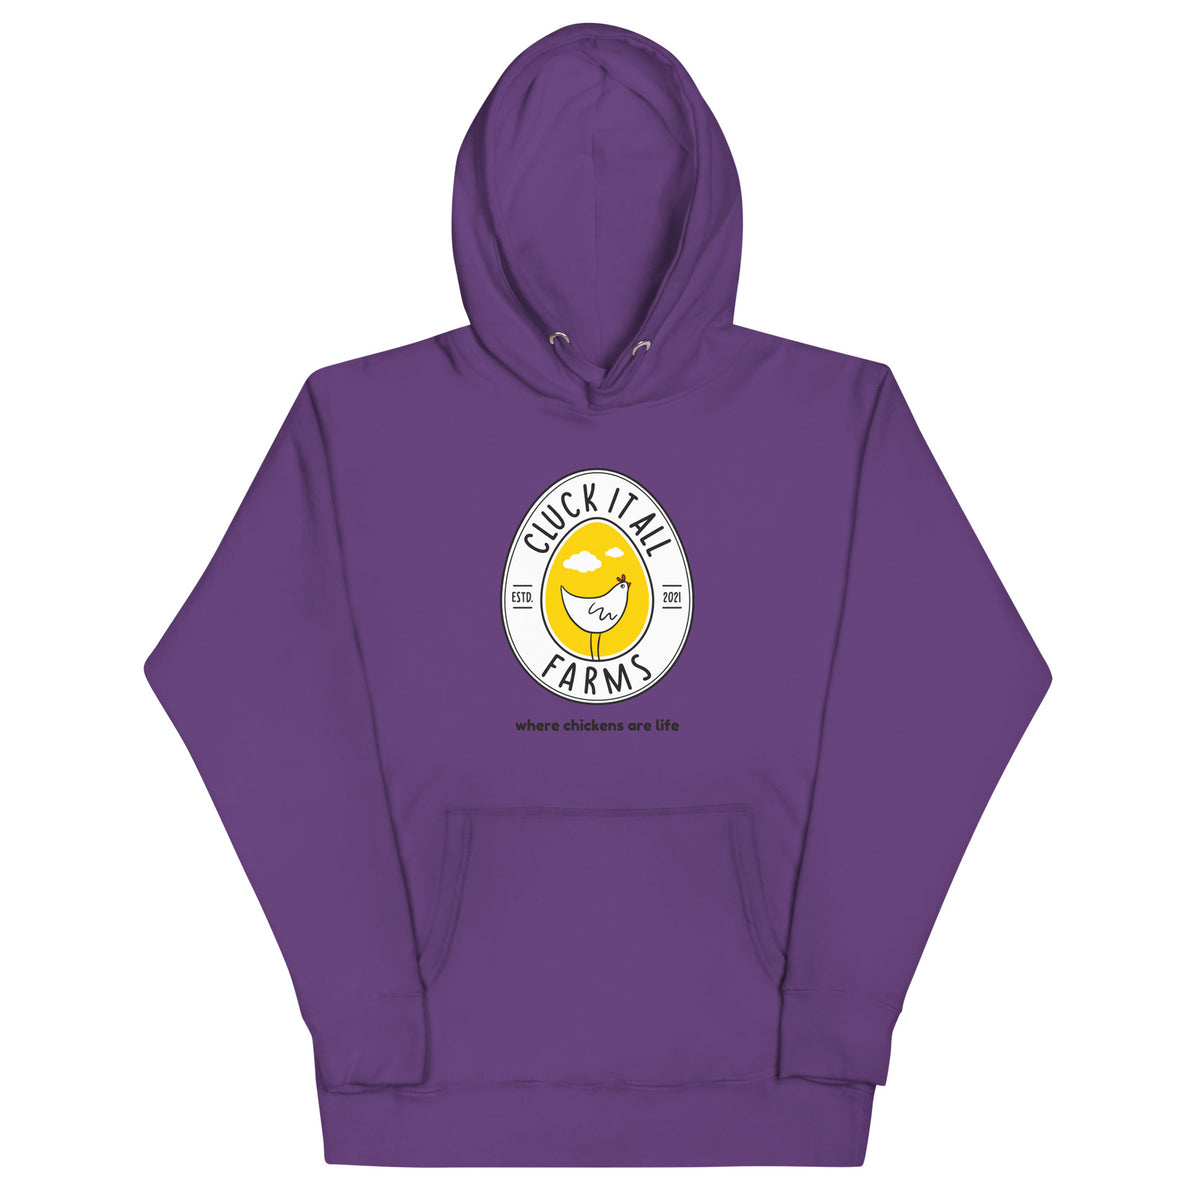 Cluck It All Farms Logo Unisex Hoodie